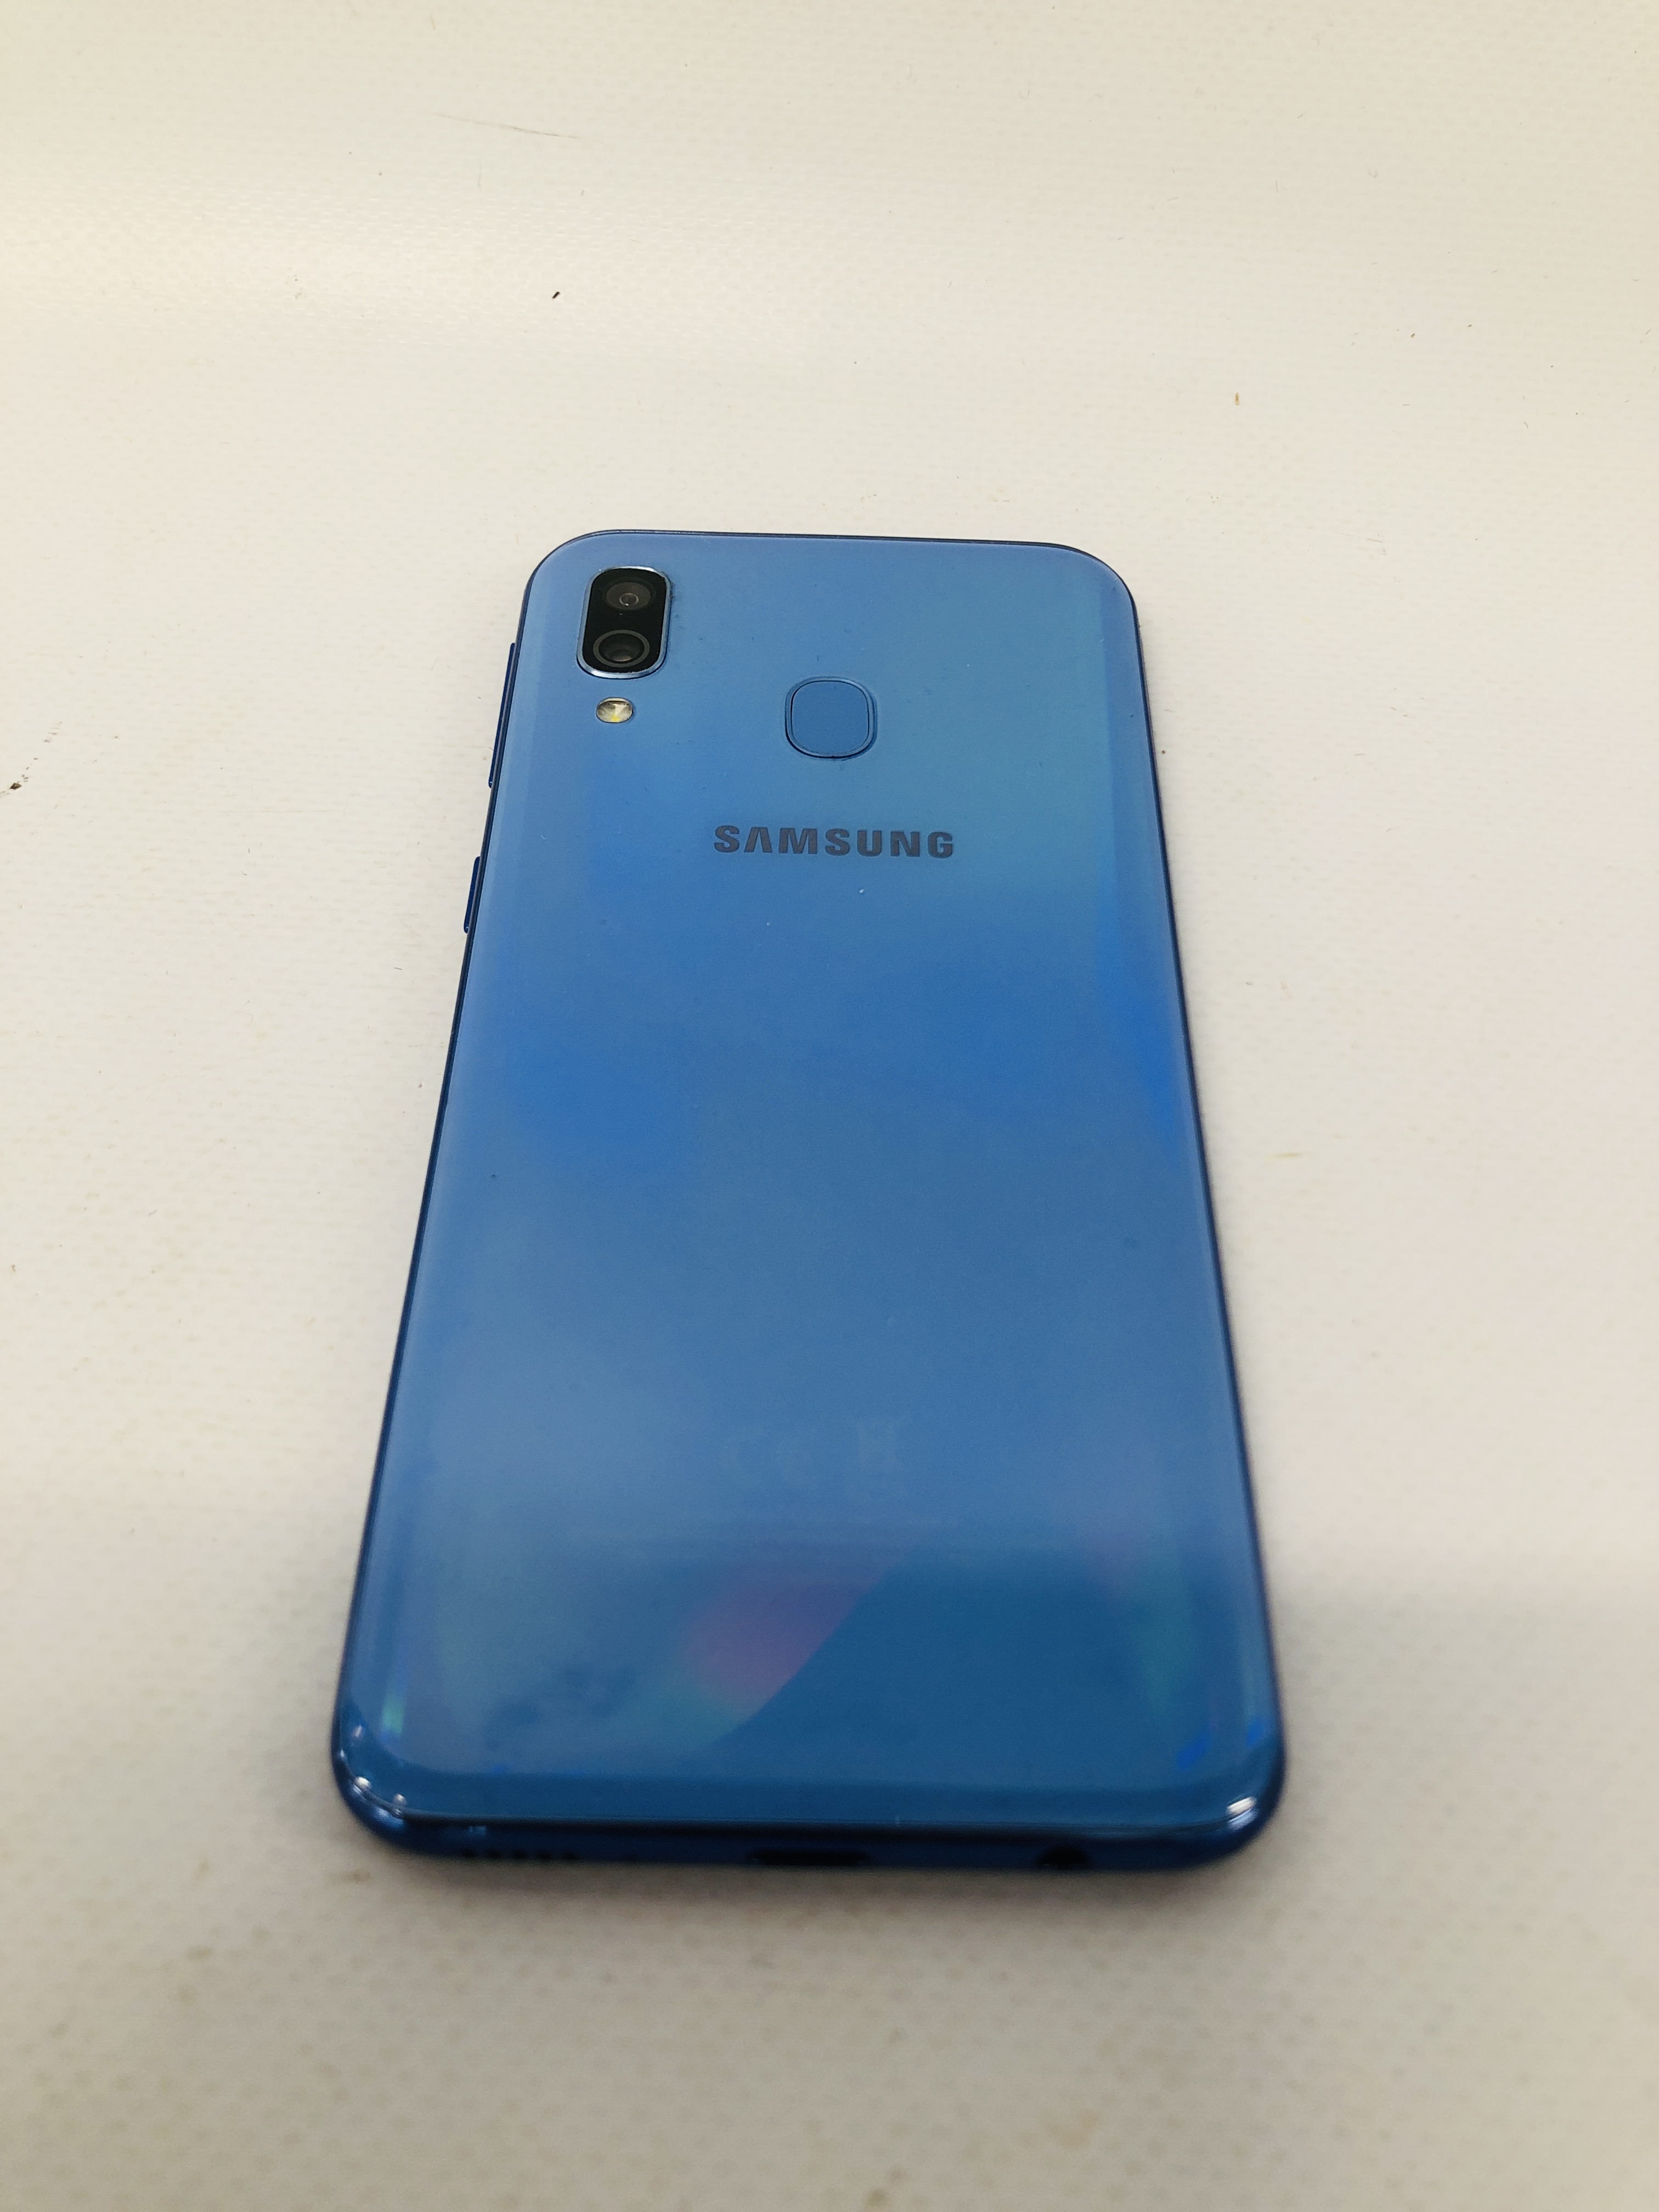 A SAMSUNG GALAXY A40 SMARTPHONE - SOLD AS SEEN - NO GUARANTEE OF CONNECTIVITY - Image 3 of 3